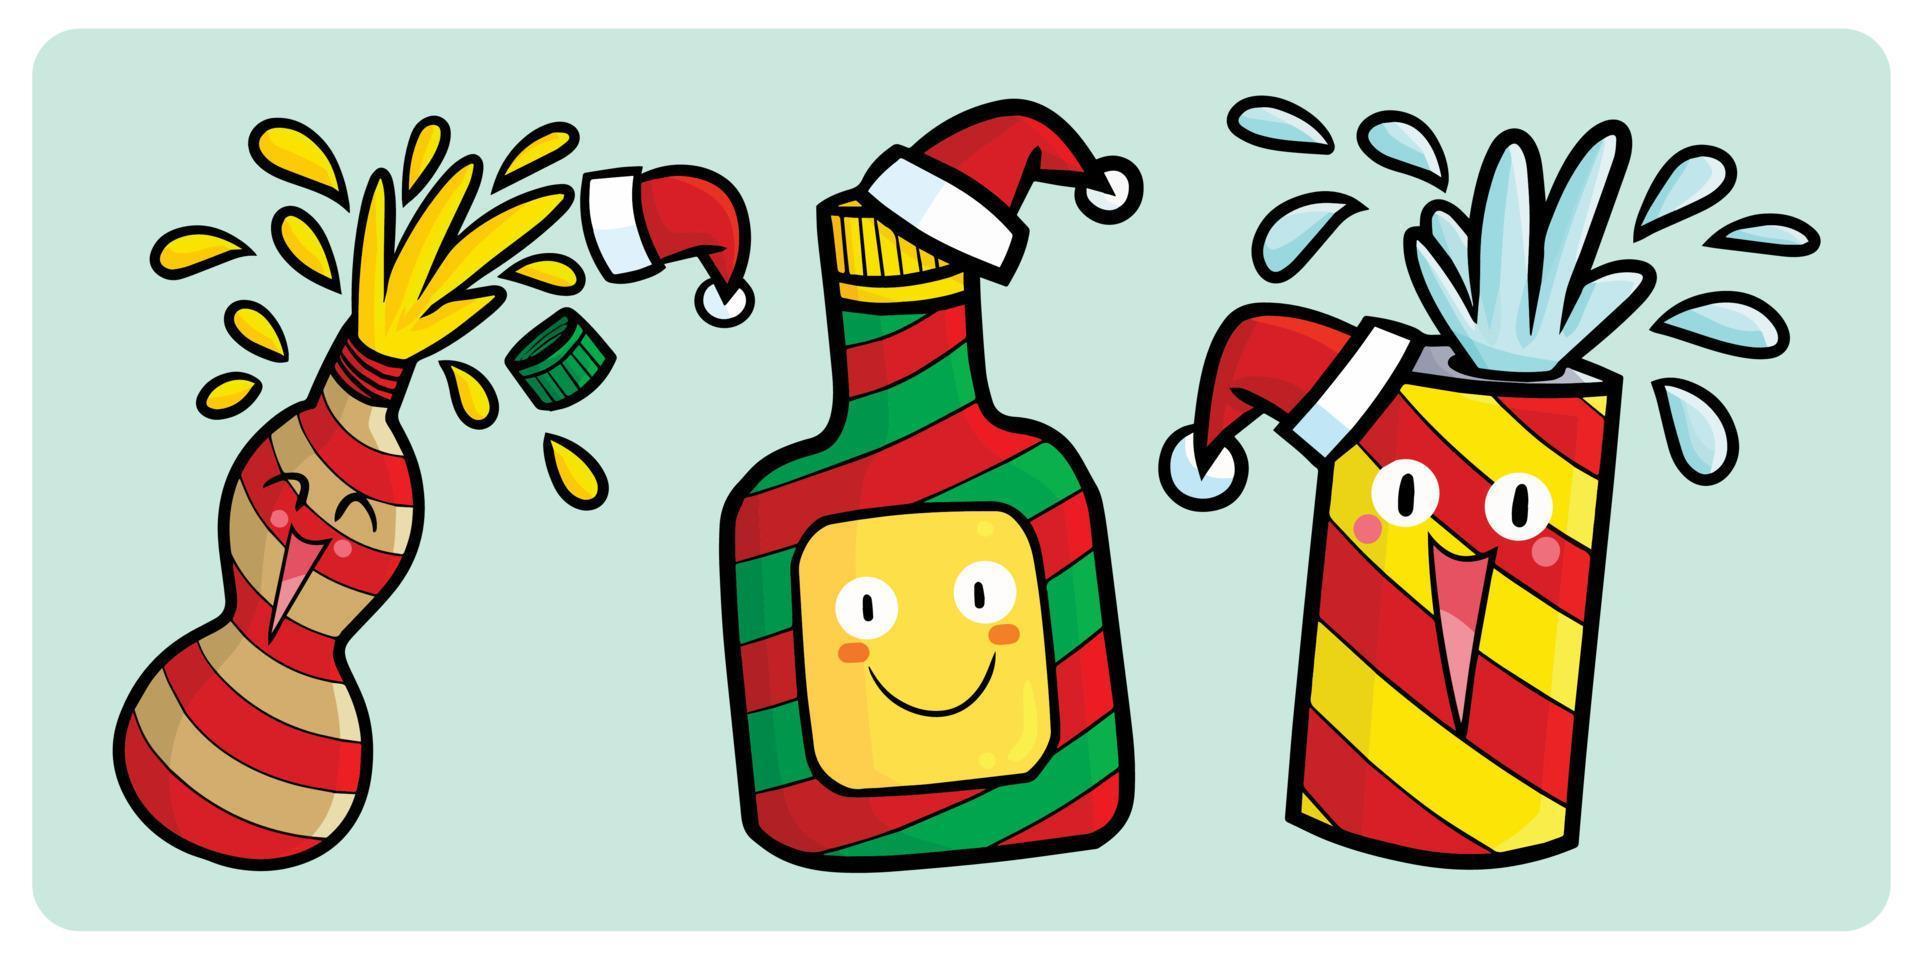 Funny christmas softdrink characters in kawaii style vector